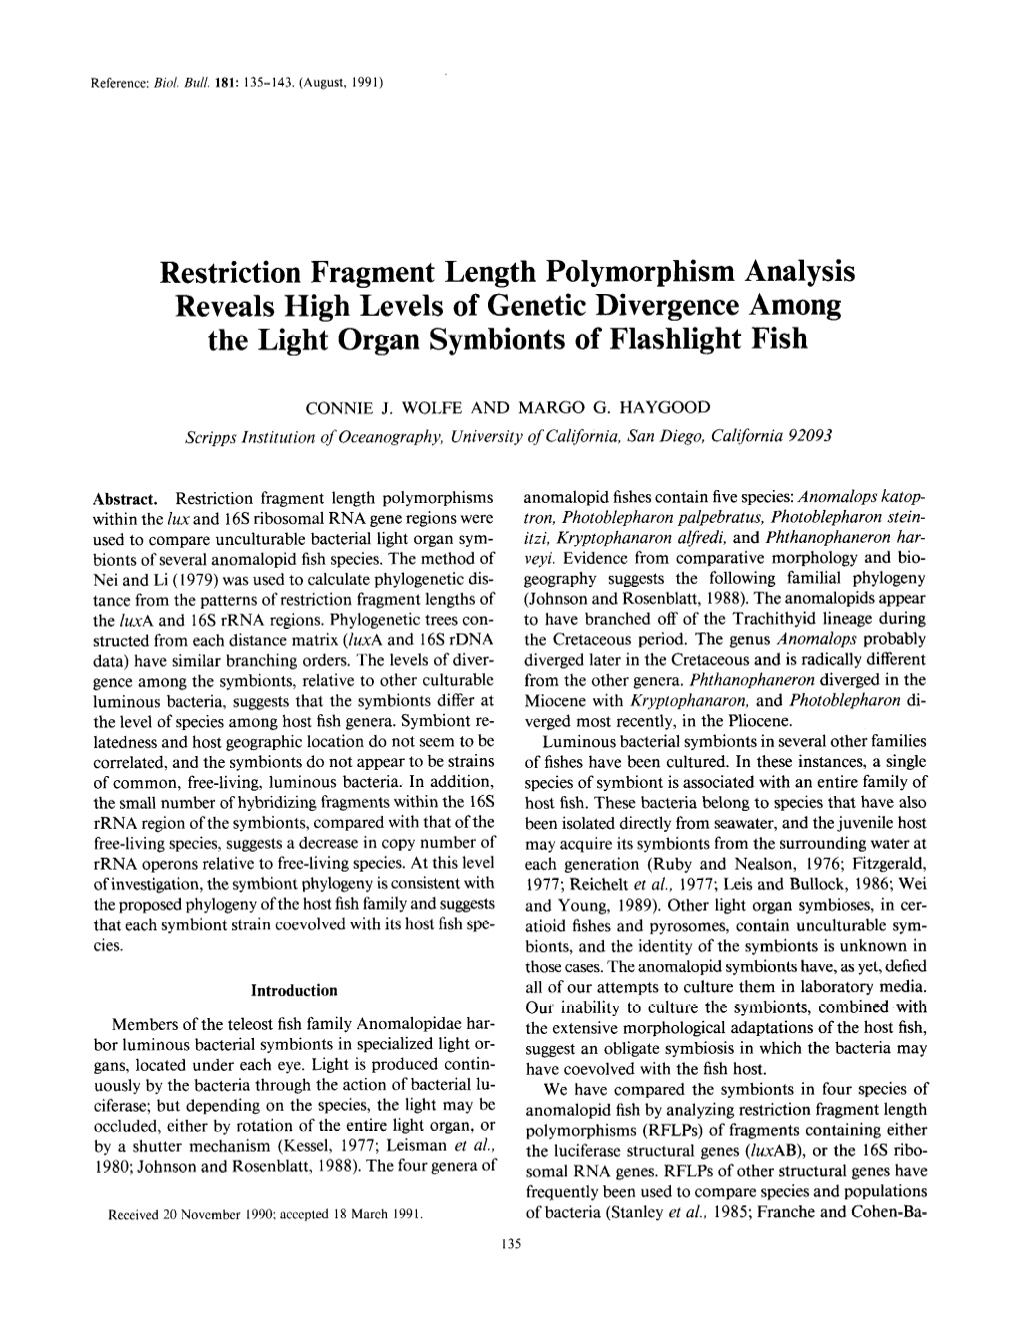 Restriction Fragment Length Polymorphism Analysis Reveals High Levels of Genetic Divergence Among the Light Organ Symbionts of Flashlight Fish